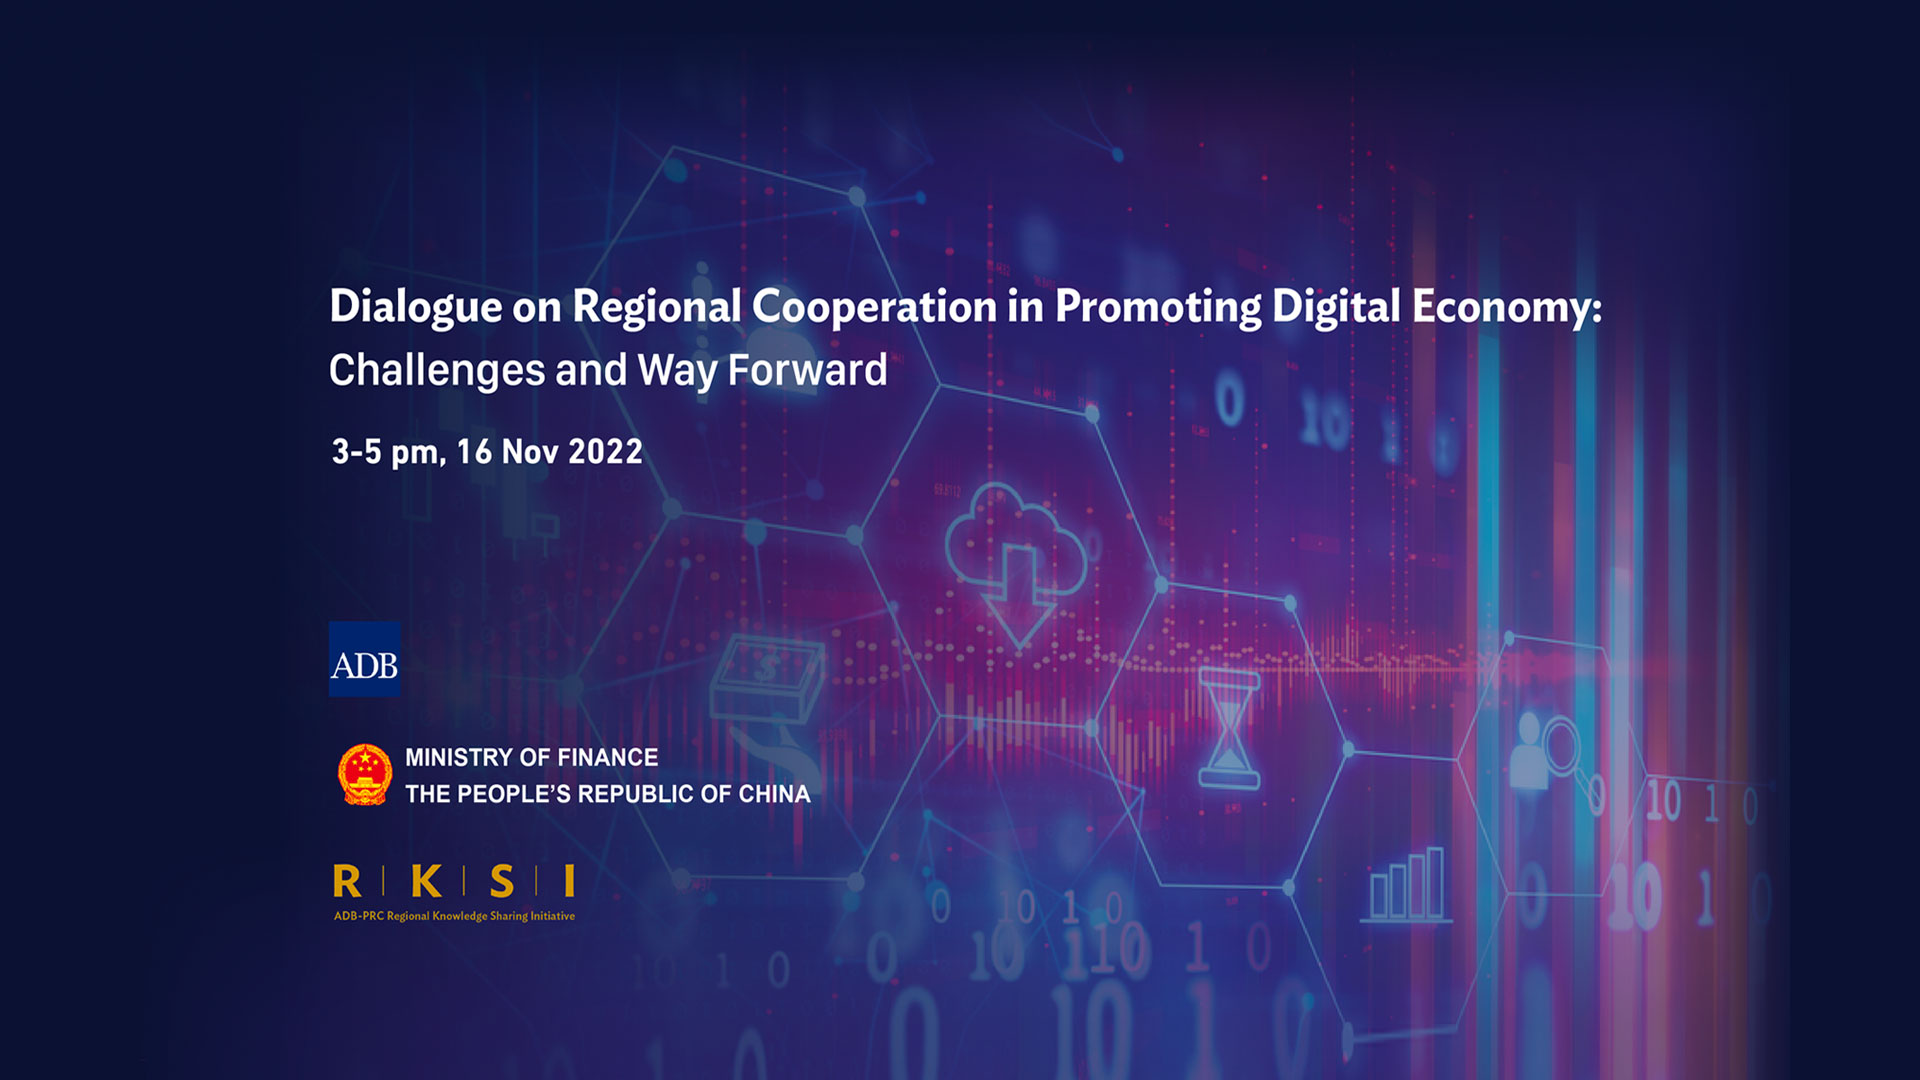 Dialogue on Regional Cooperation in Promoting Digital Economy: Challenges and Way Forward